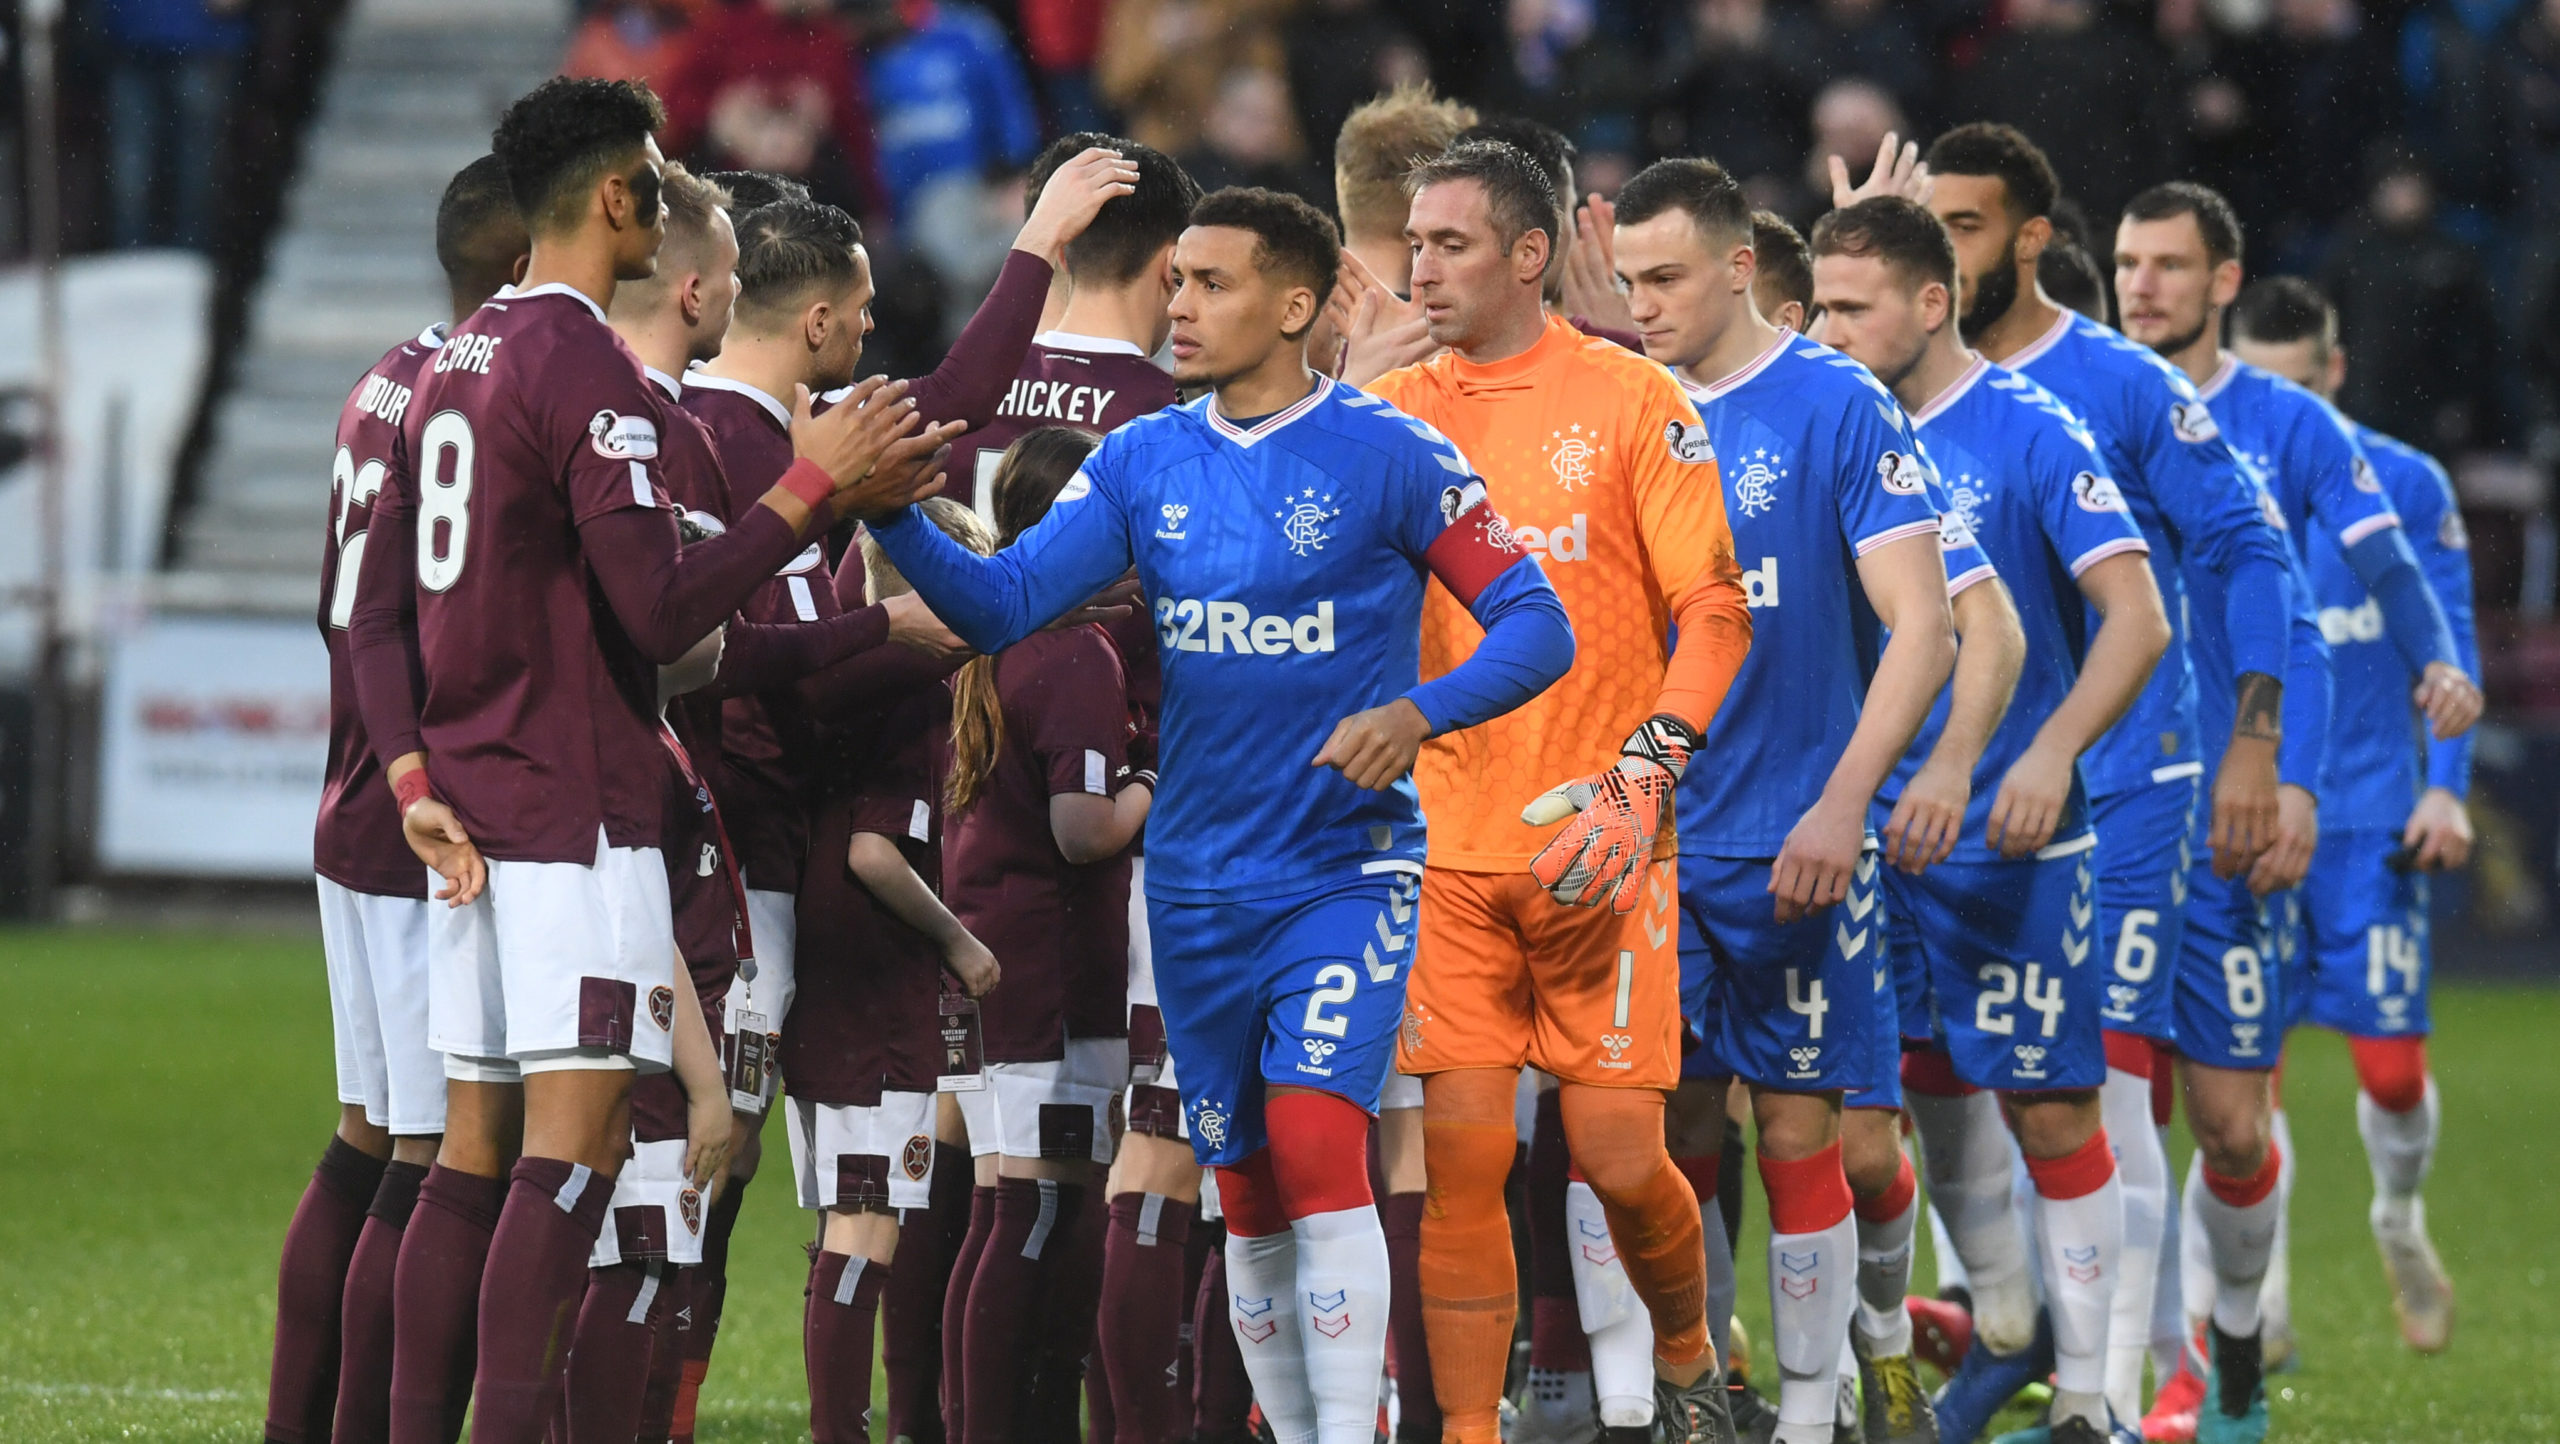 Hearts ousted Rangers at Tynecastle in the quarter-finals.